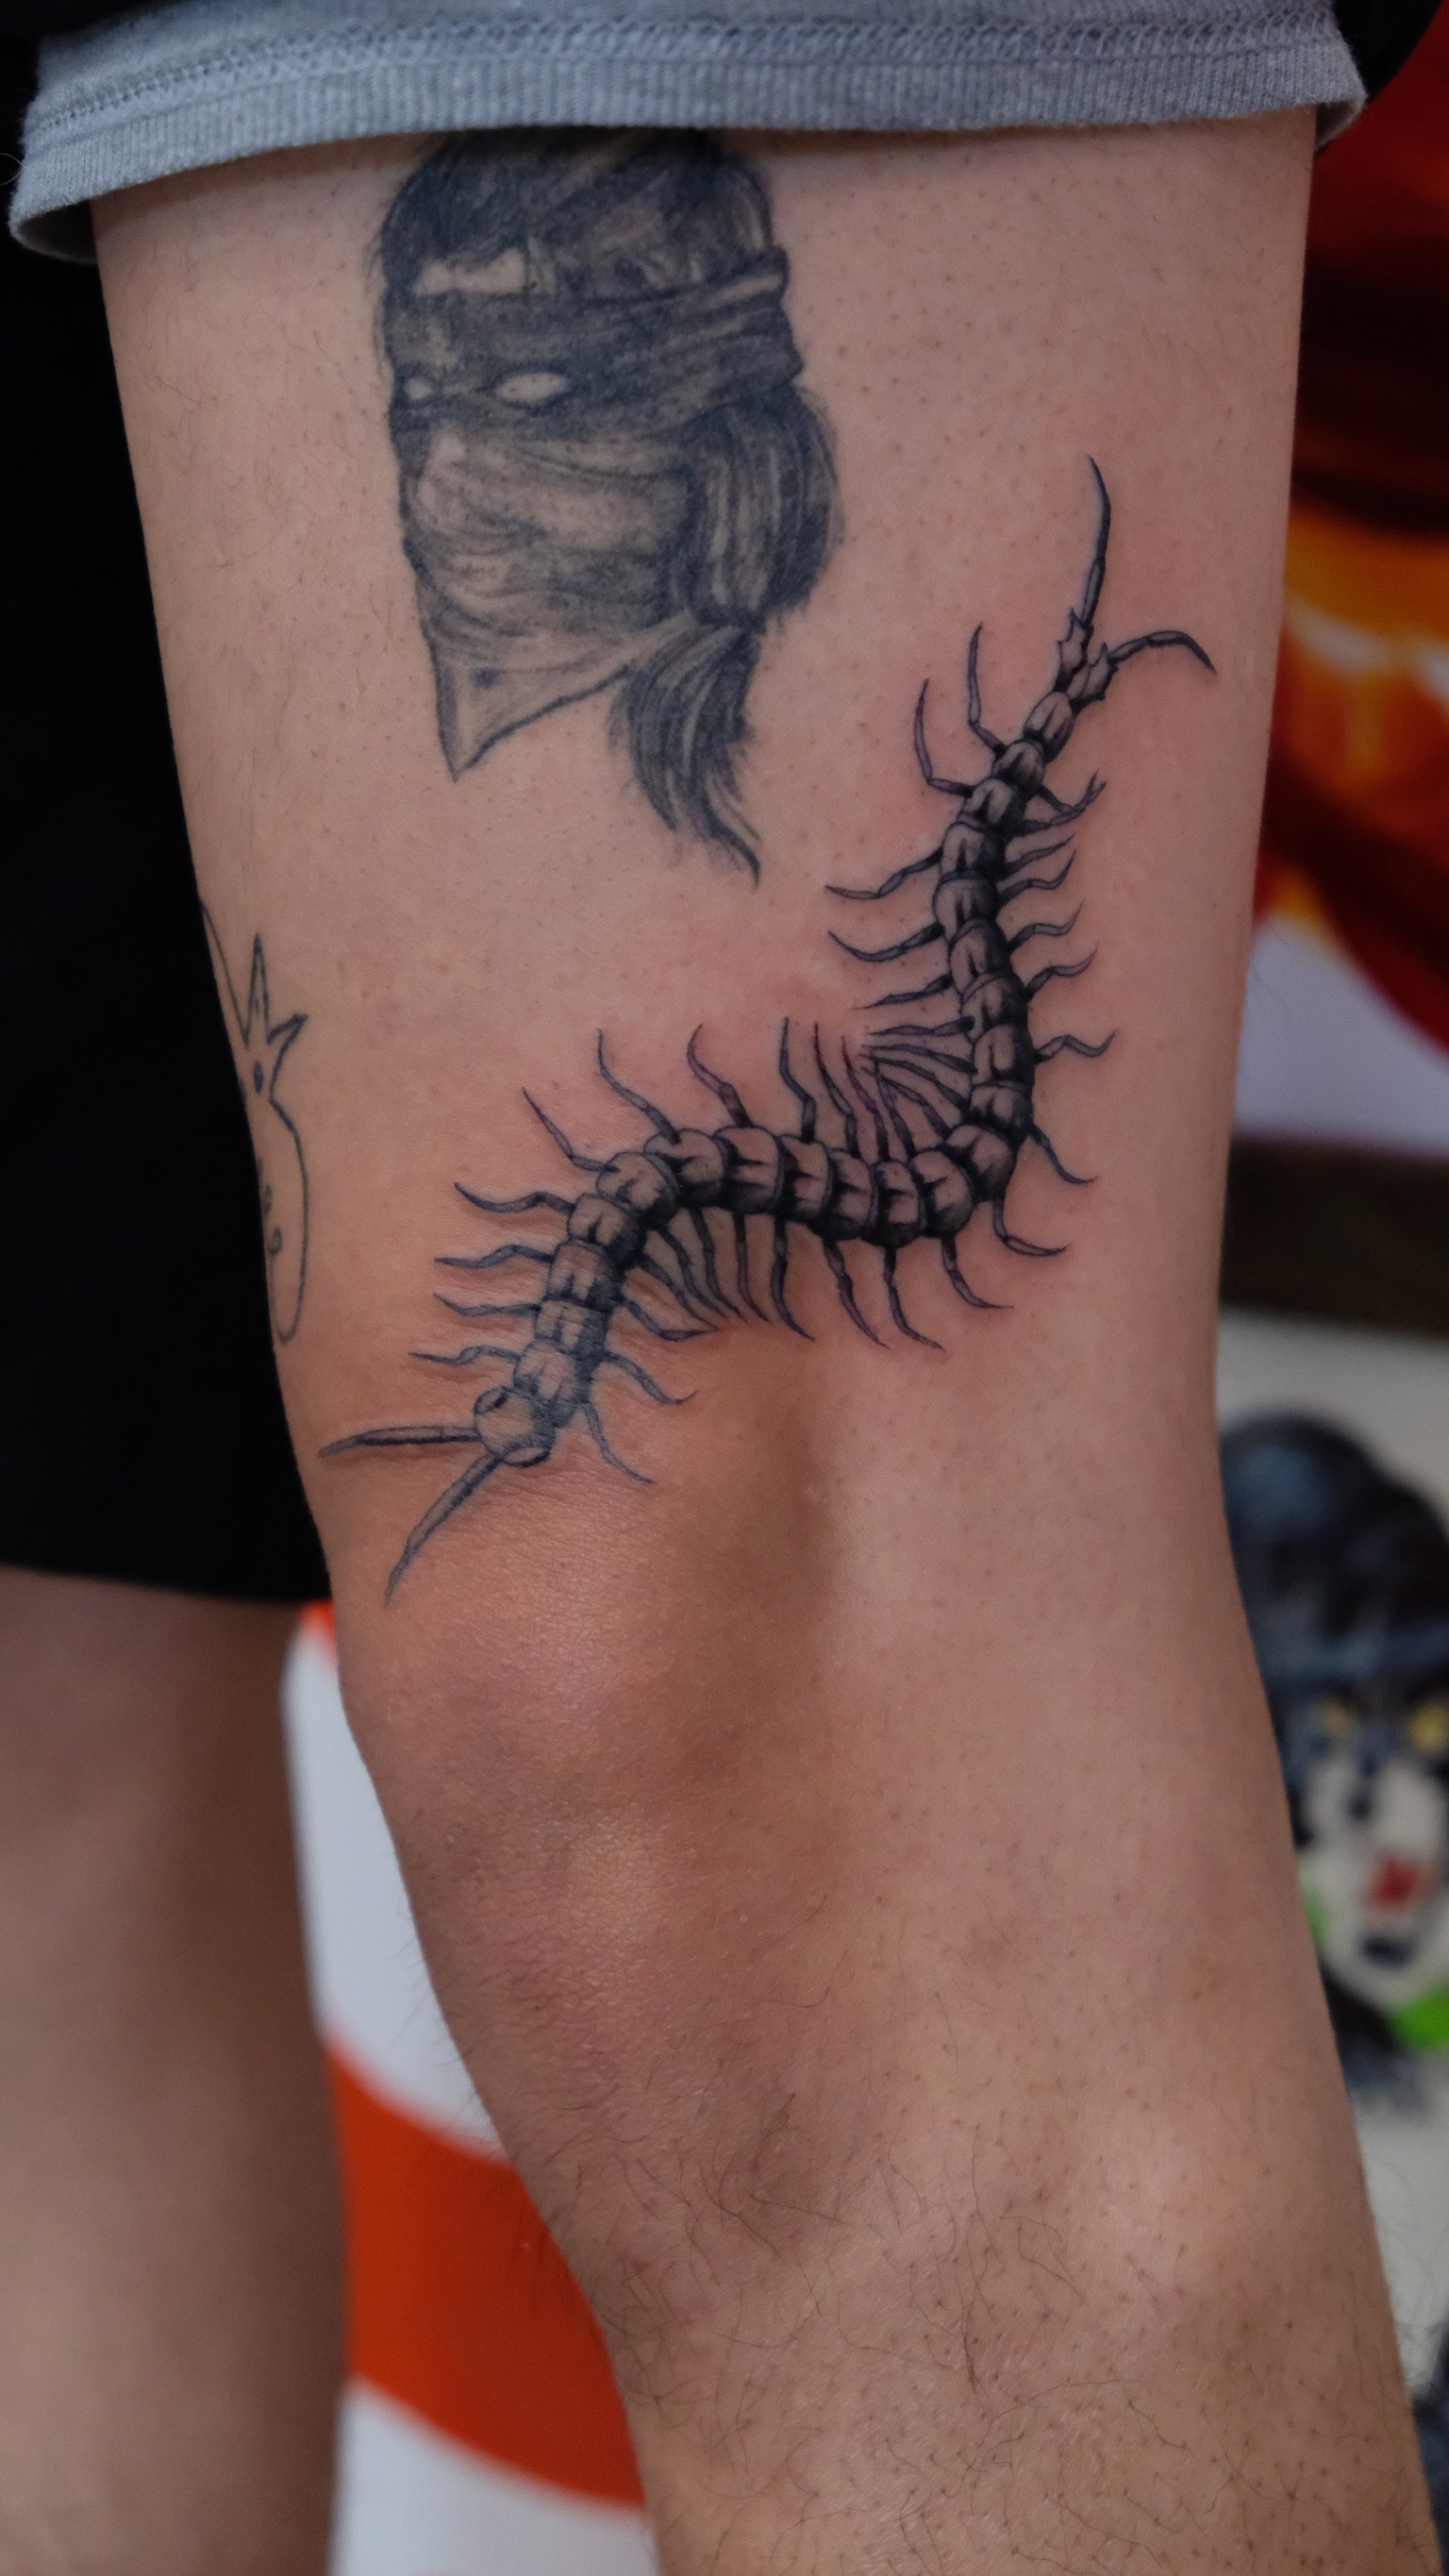 JAKUP  jake  on Instagram Centipede This was so much fun Thanks  Danni Your ideas are anyways dope  In case youre curious this took 4  hours to tattoo